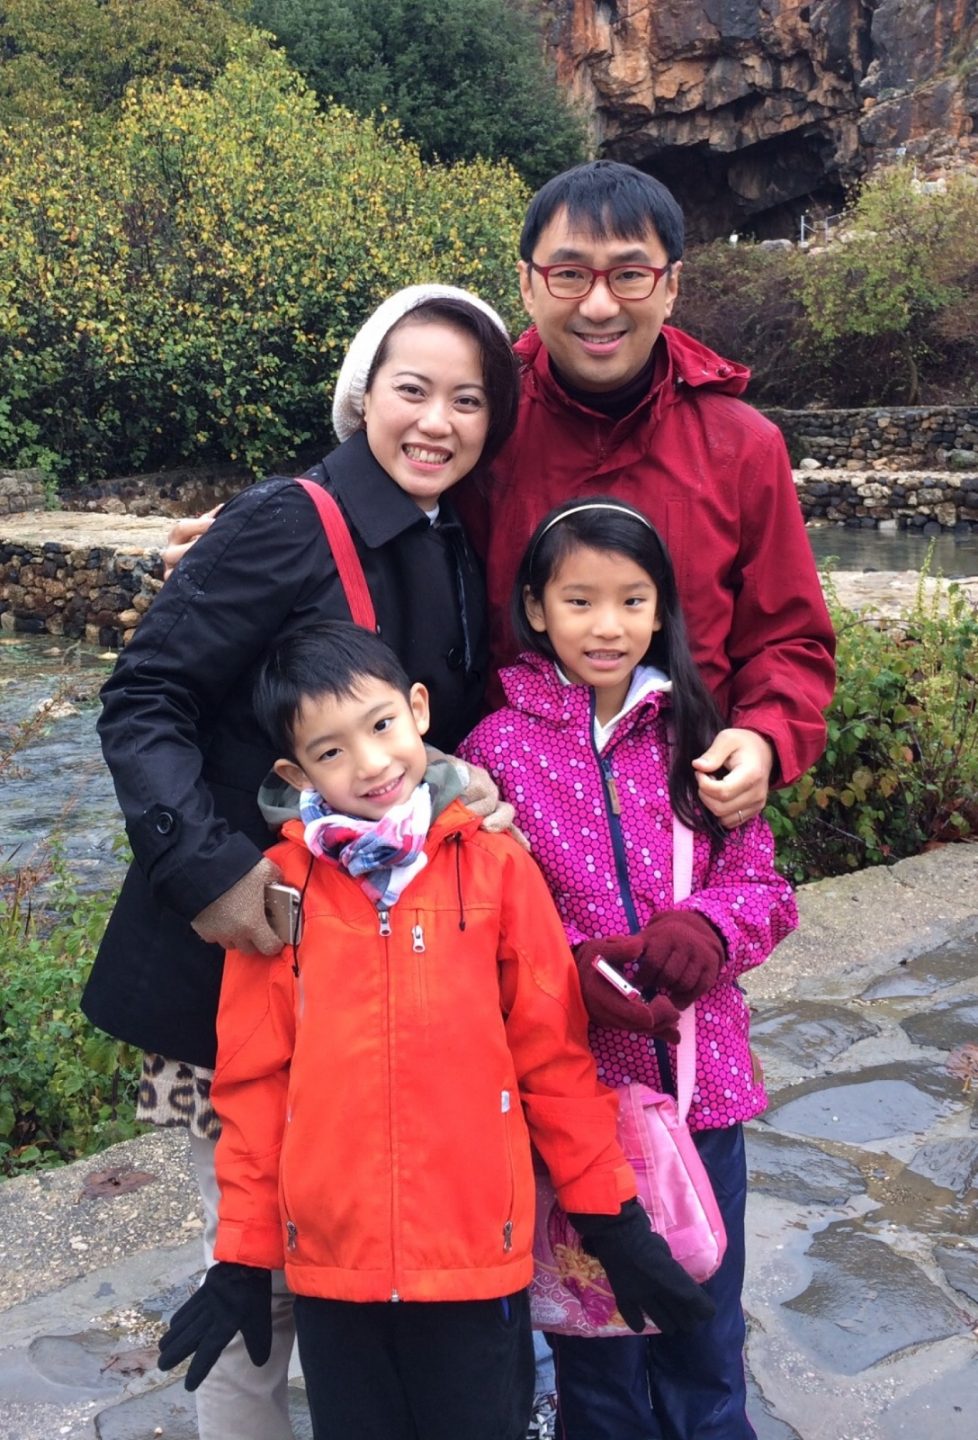 Thong with his family  on a trip to Israel in 2015.